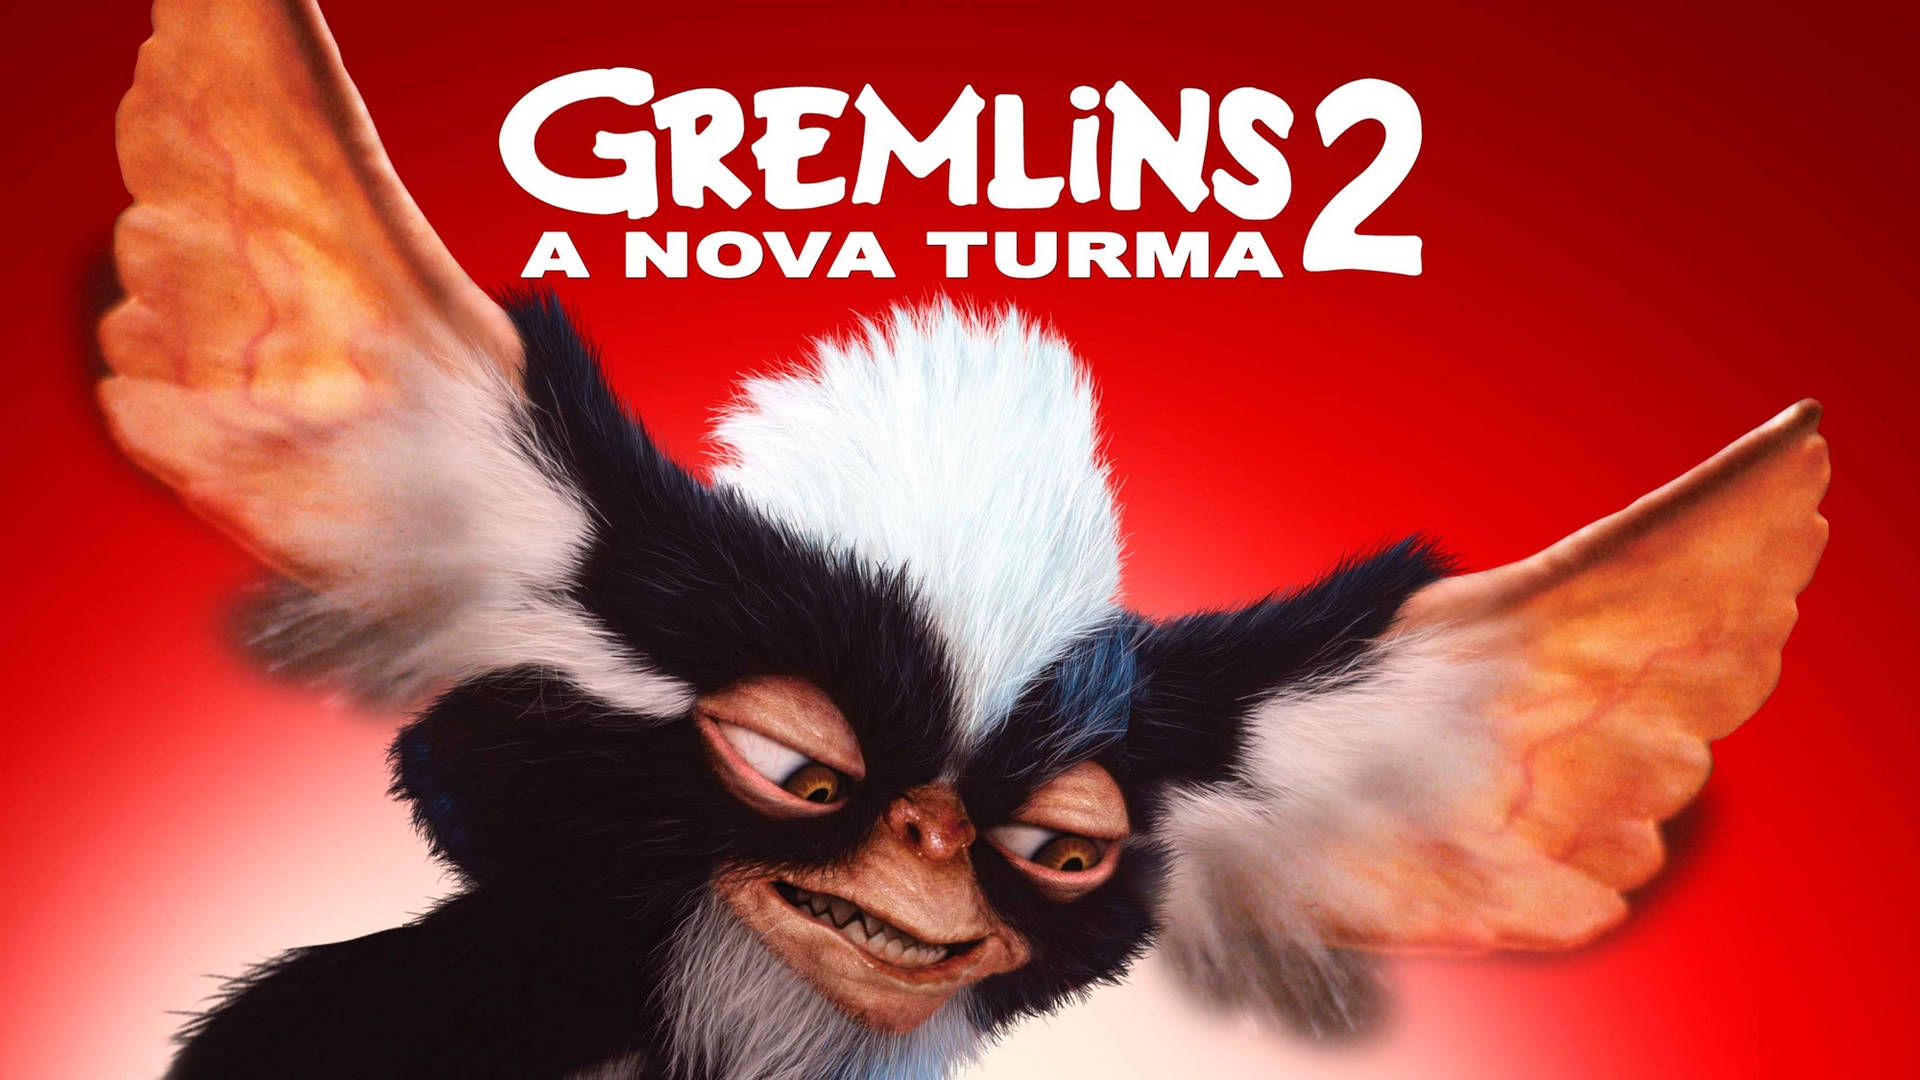 Gremlins 2: The New Batch Portuguese Poster Wallpaper